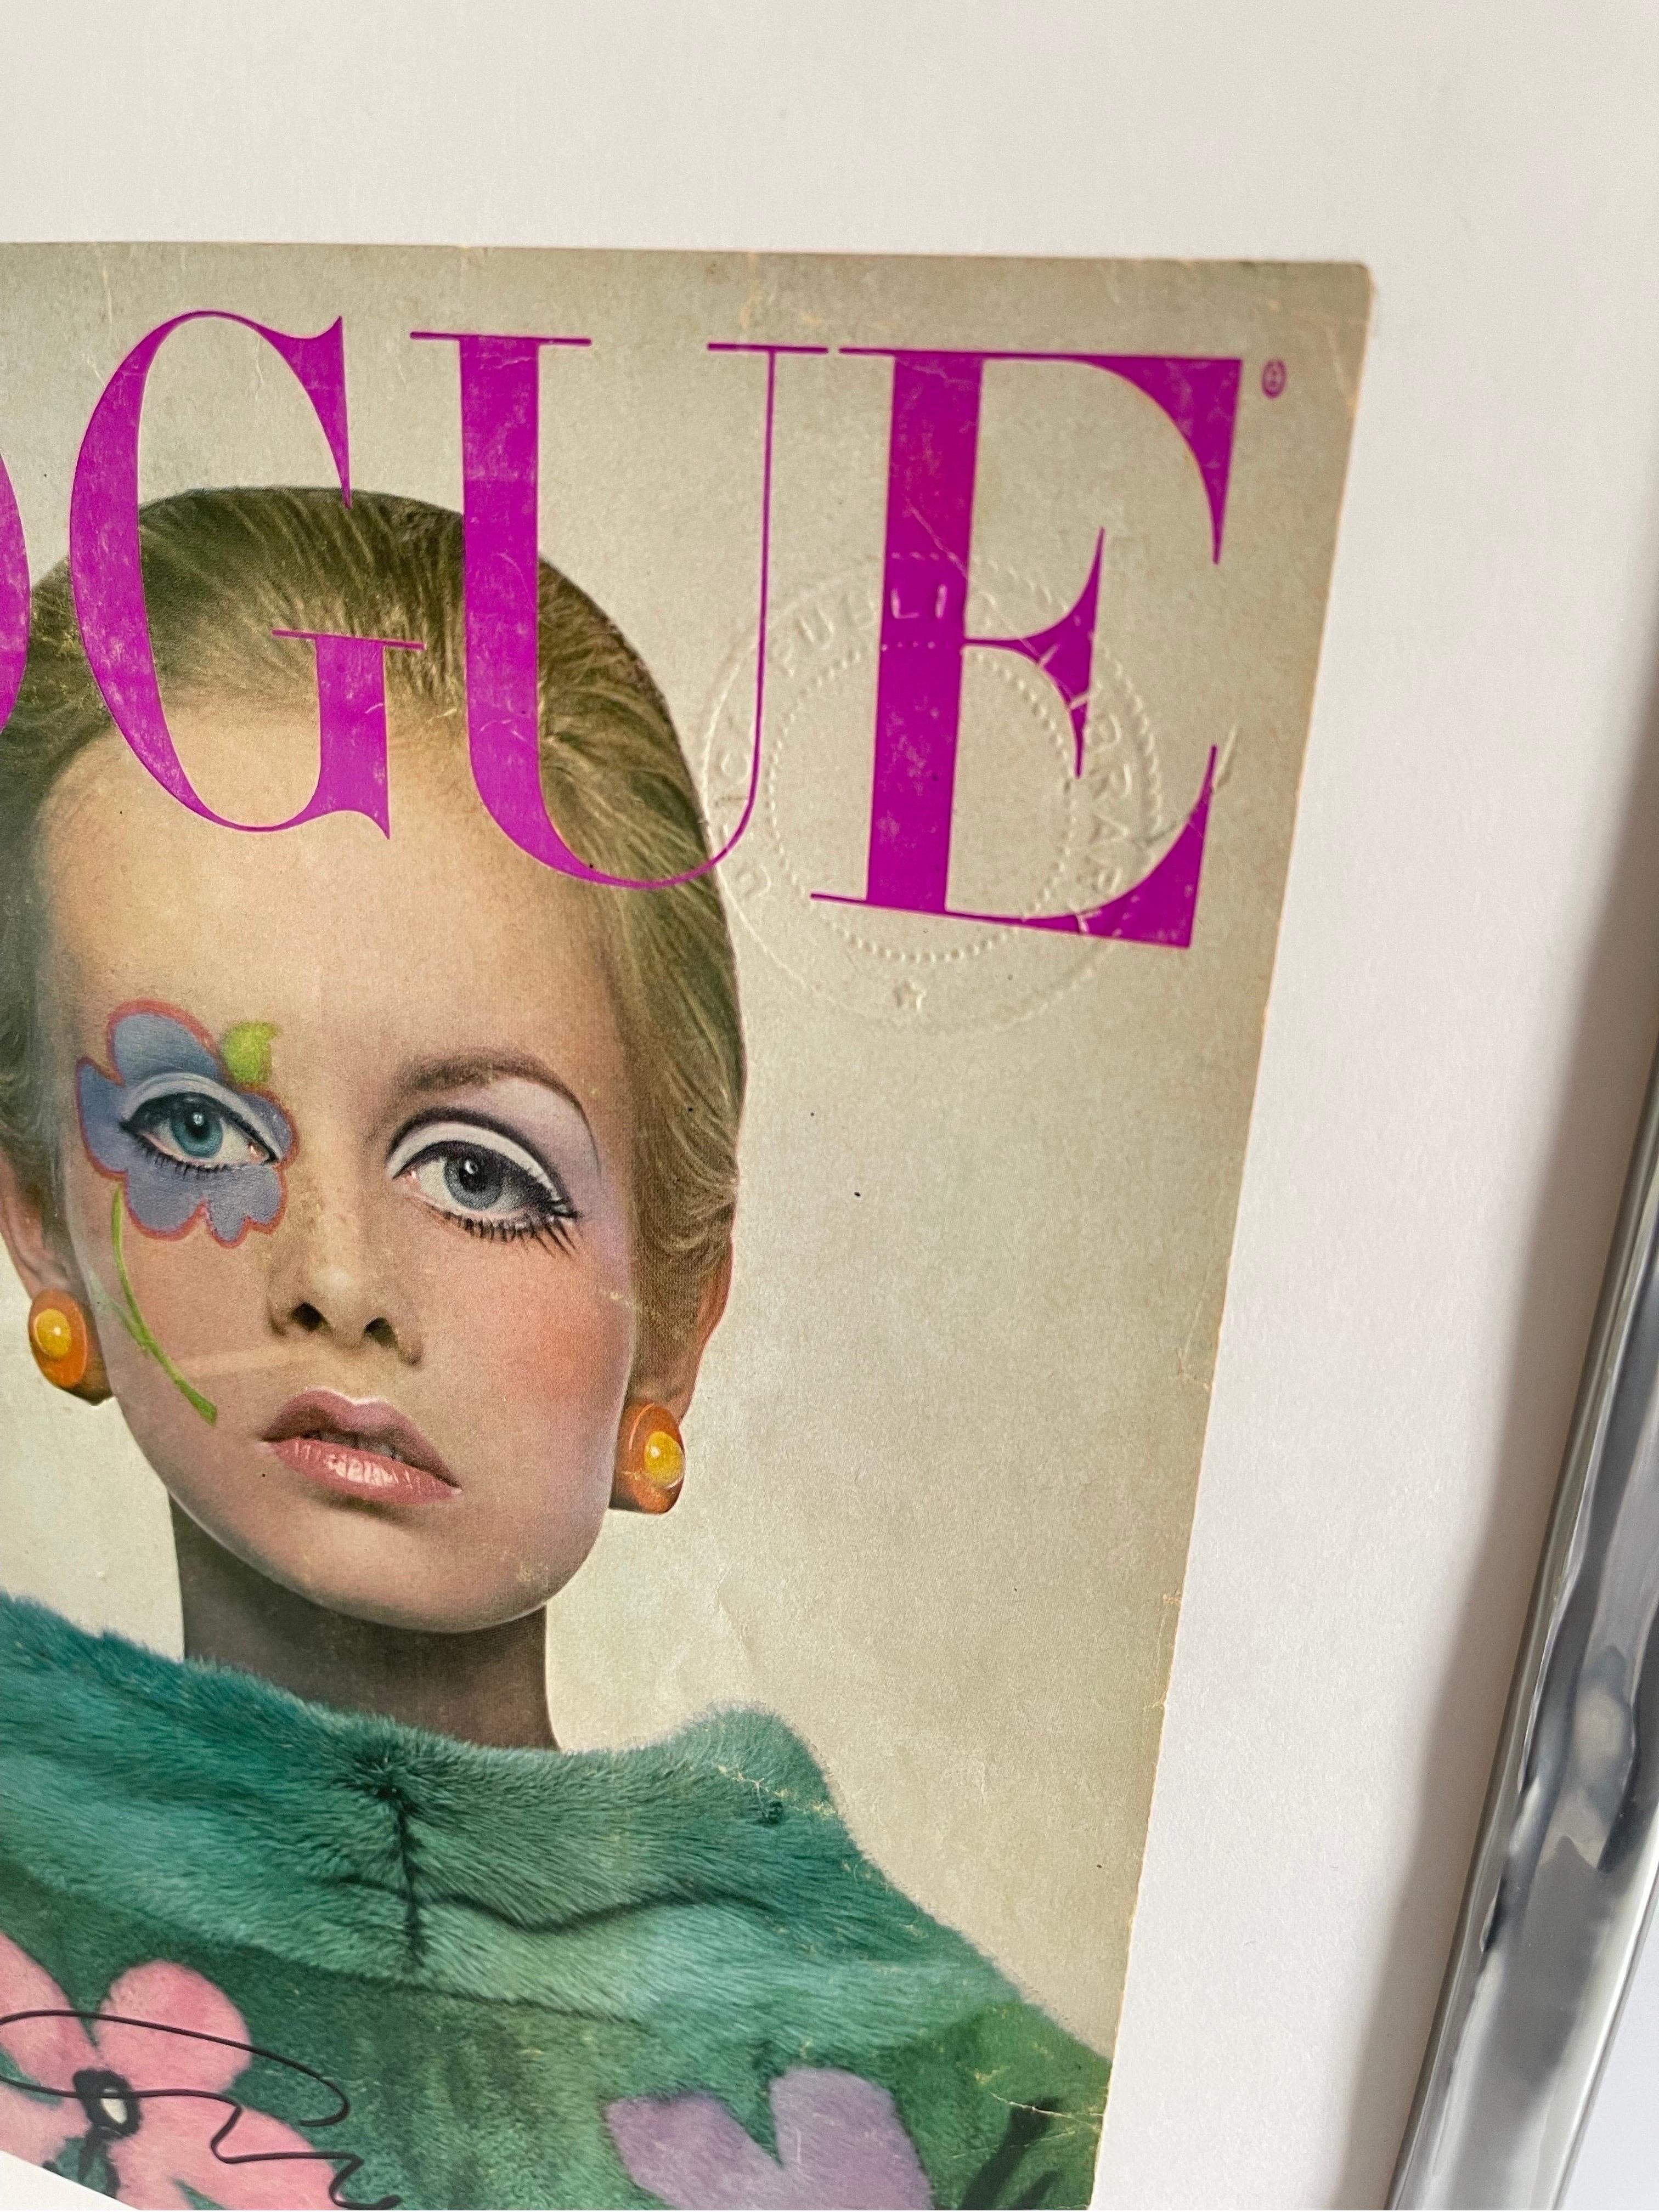 American Vogue July 1967 Twiggy Cover Signed by Richard Avedon